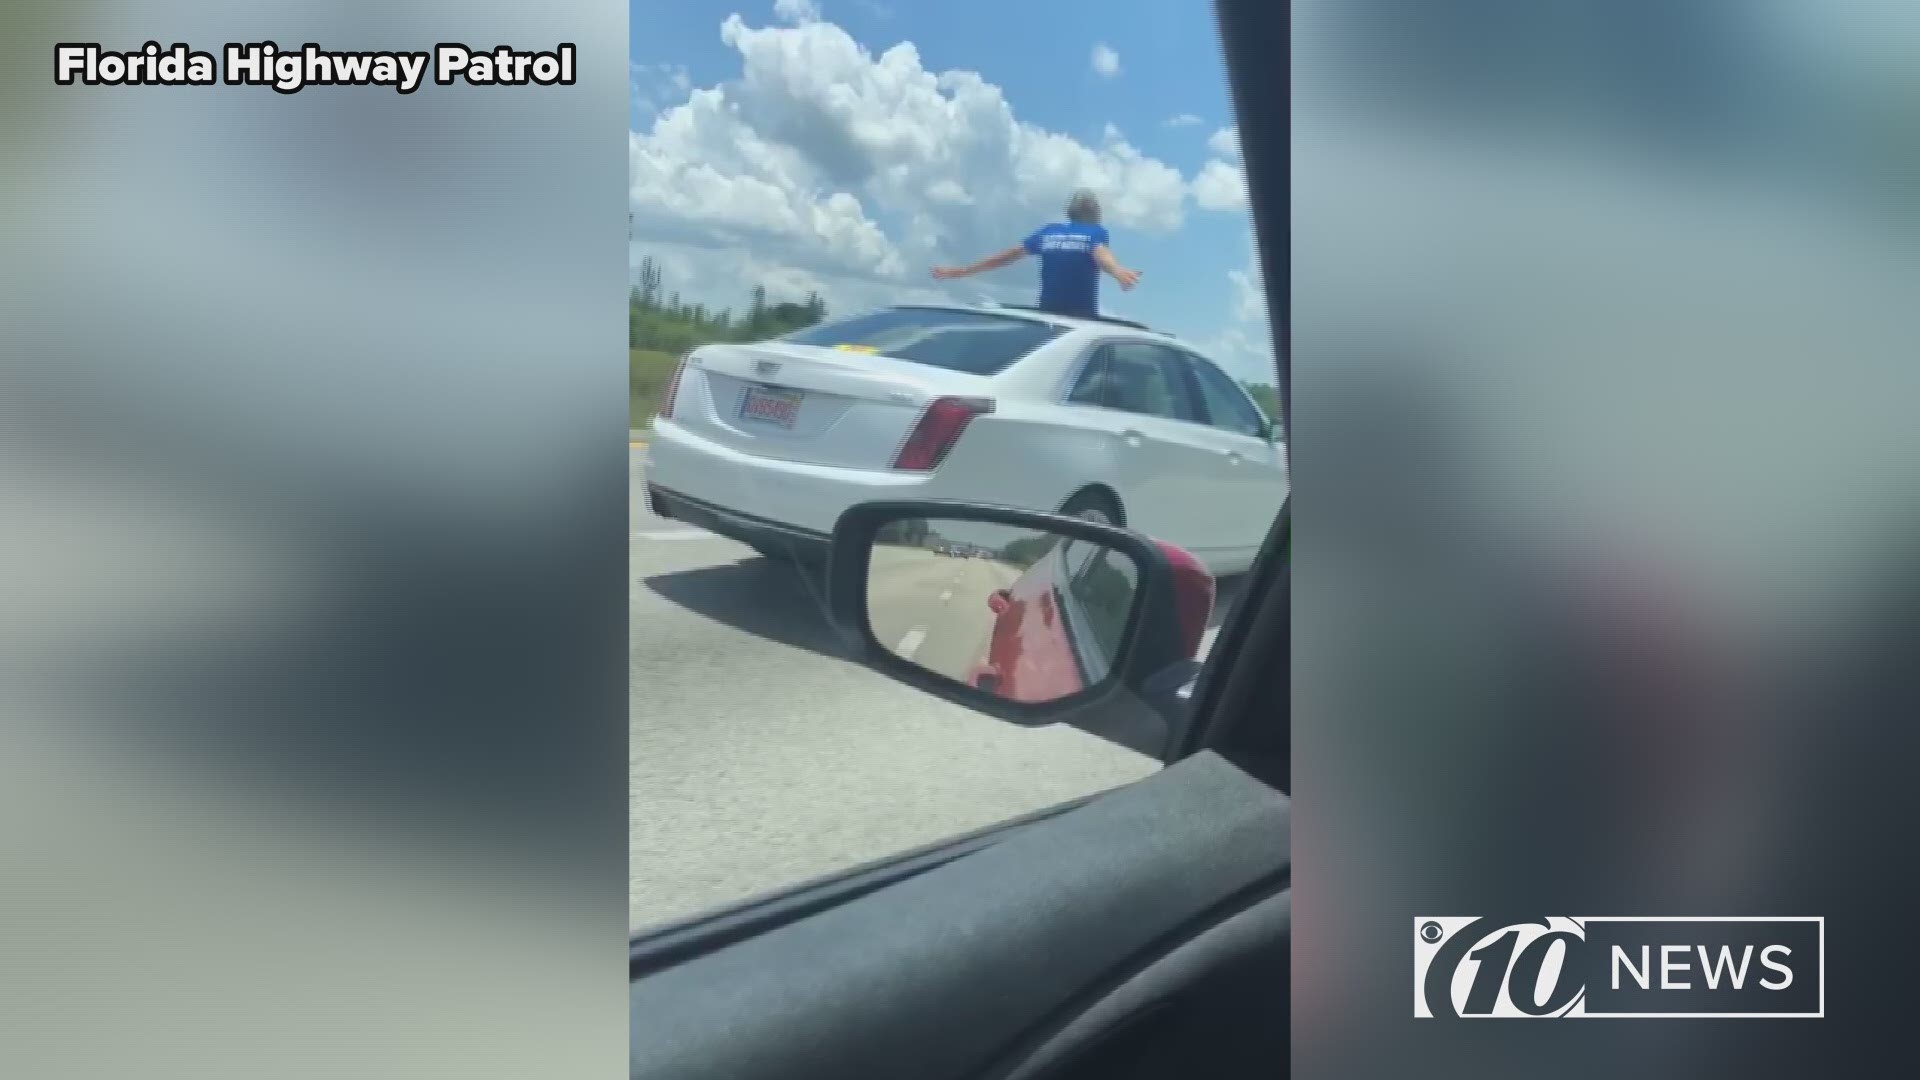 Leonard Olsen was arrested after Florida Highway Patrol officials say he was sitting on top of a Cadillac sunroof while cruising westbound on I-4.